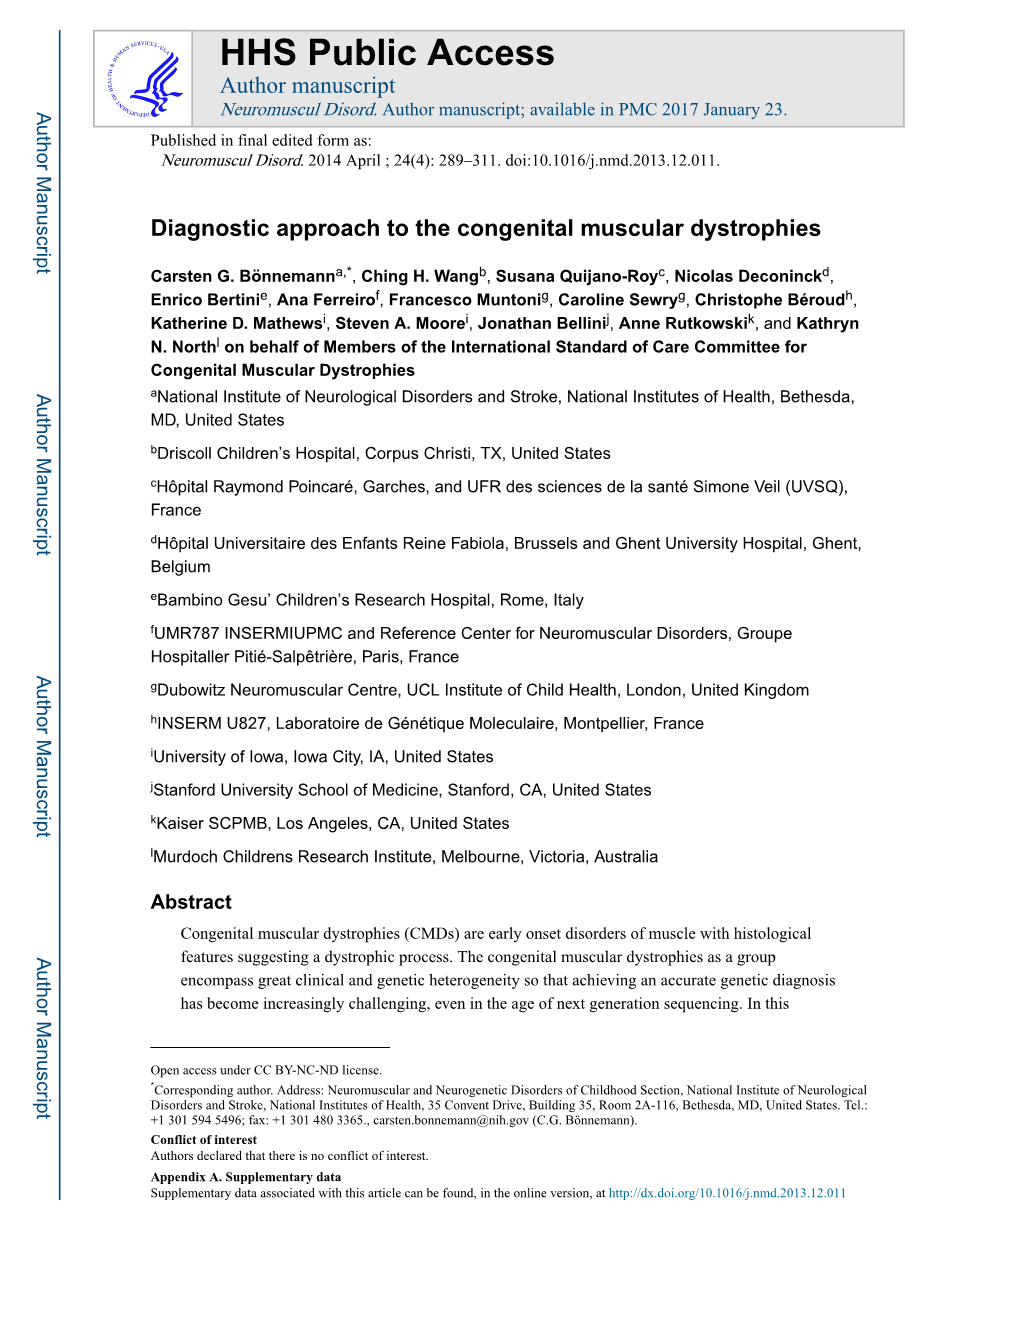 Diagnostic Approach to the Congenital Muscular Dystrophies